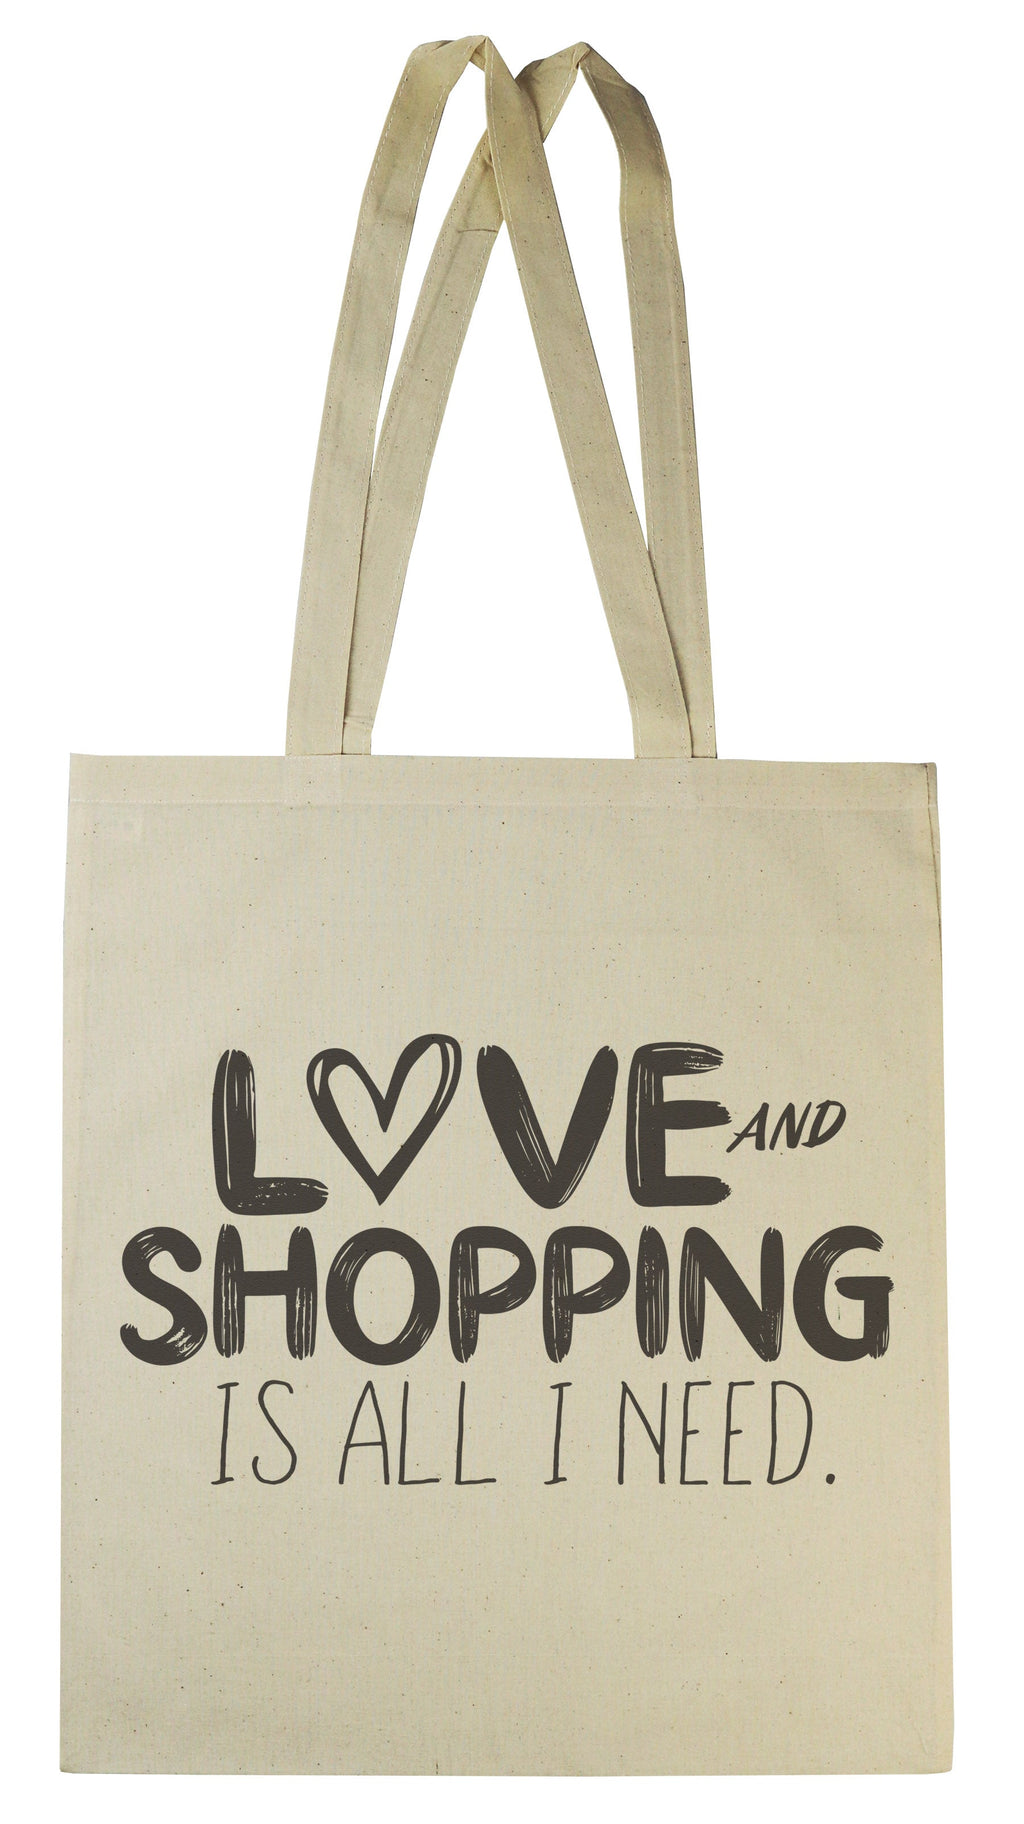 Love And Shopping Is All I Need - Canvas Tote Shopping Bag (4339412238385)